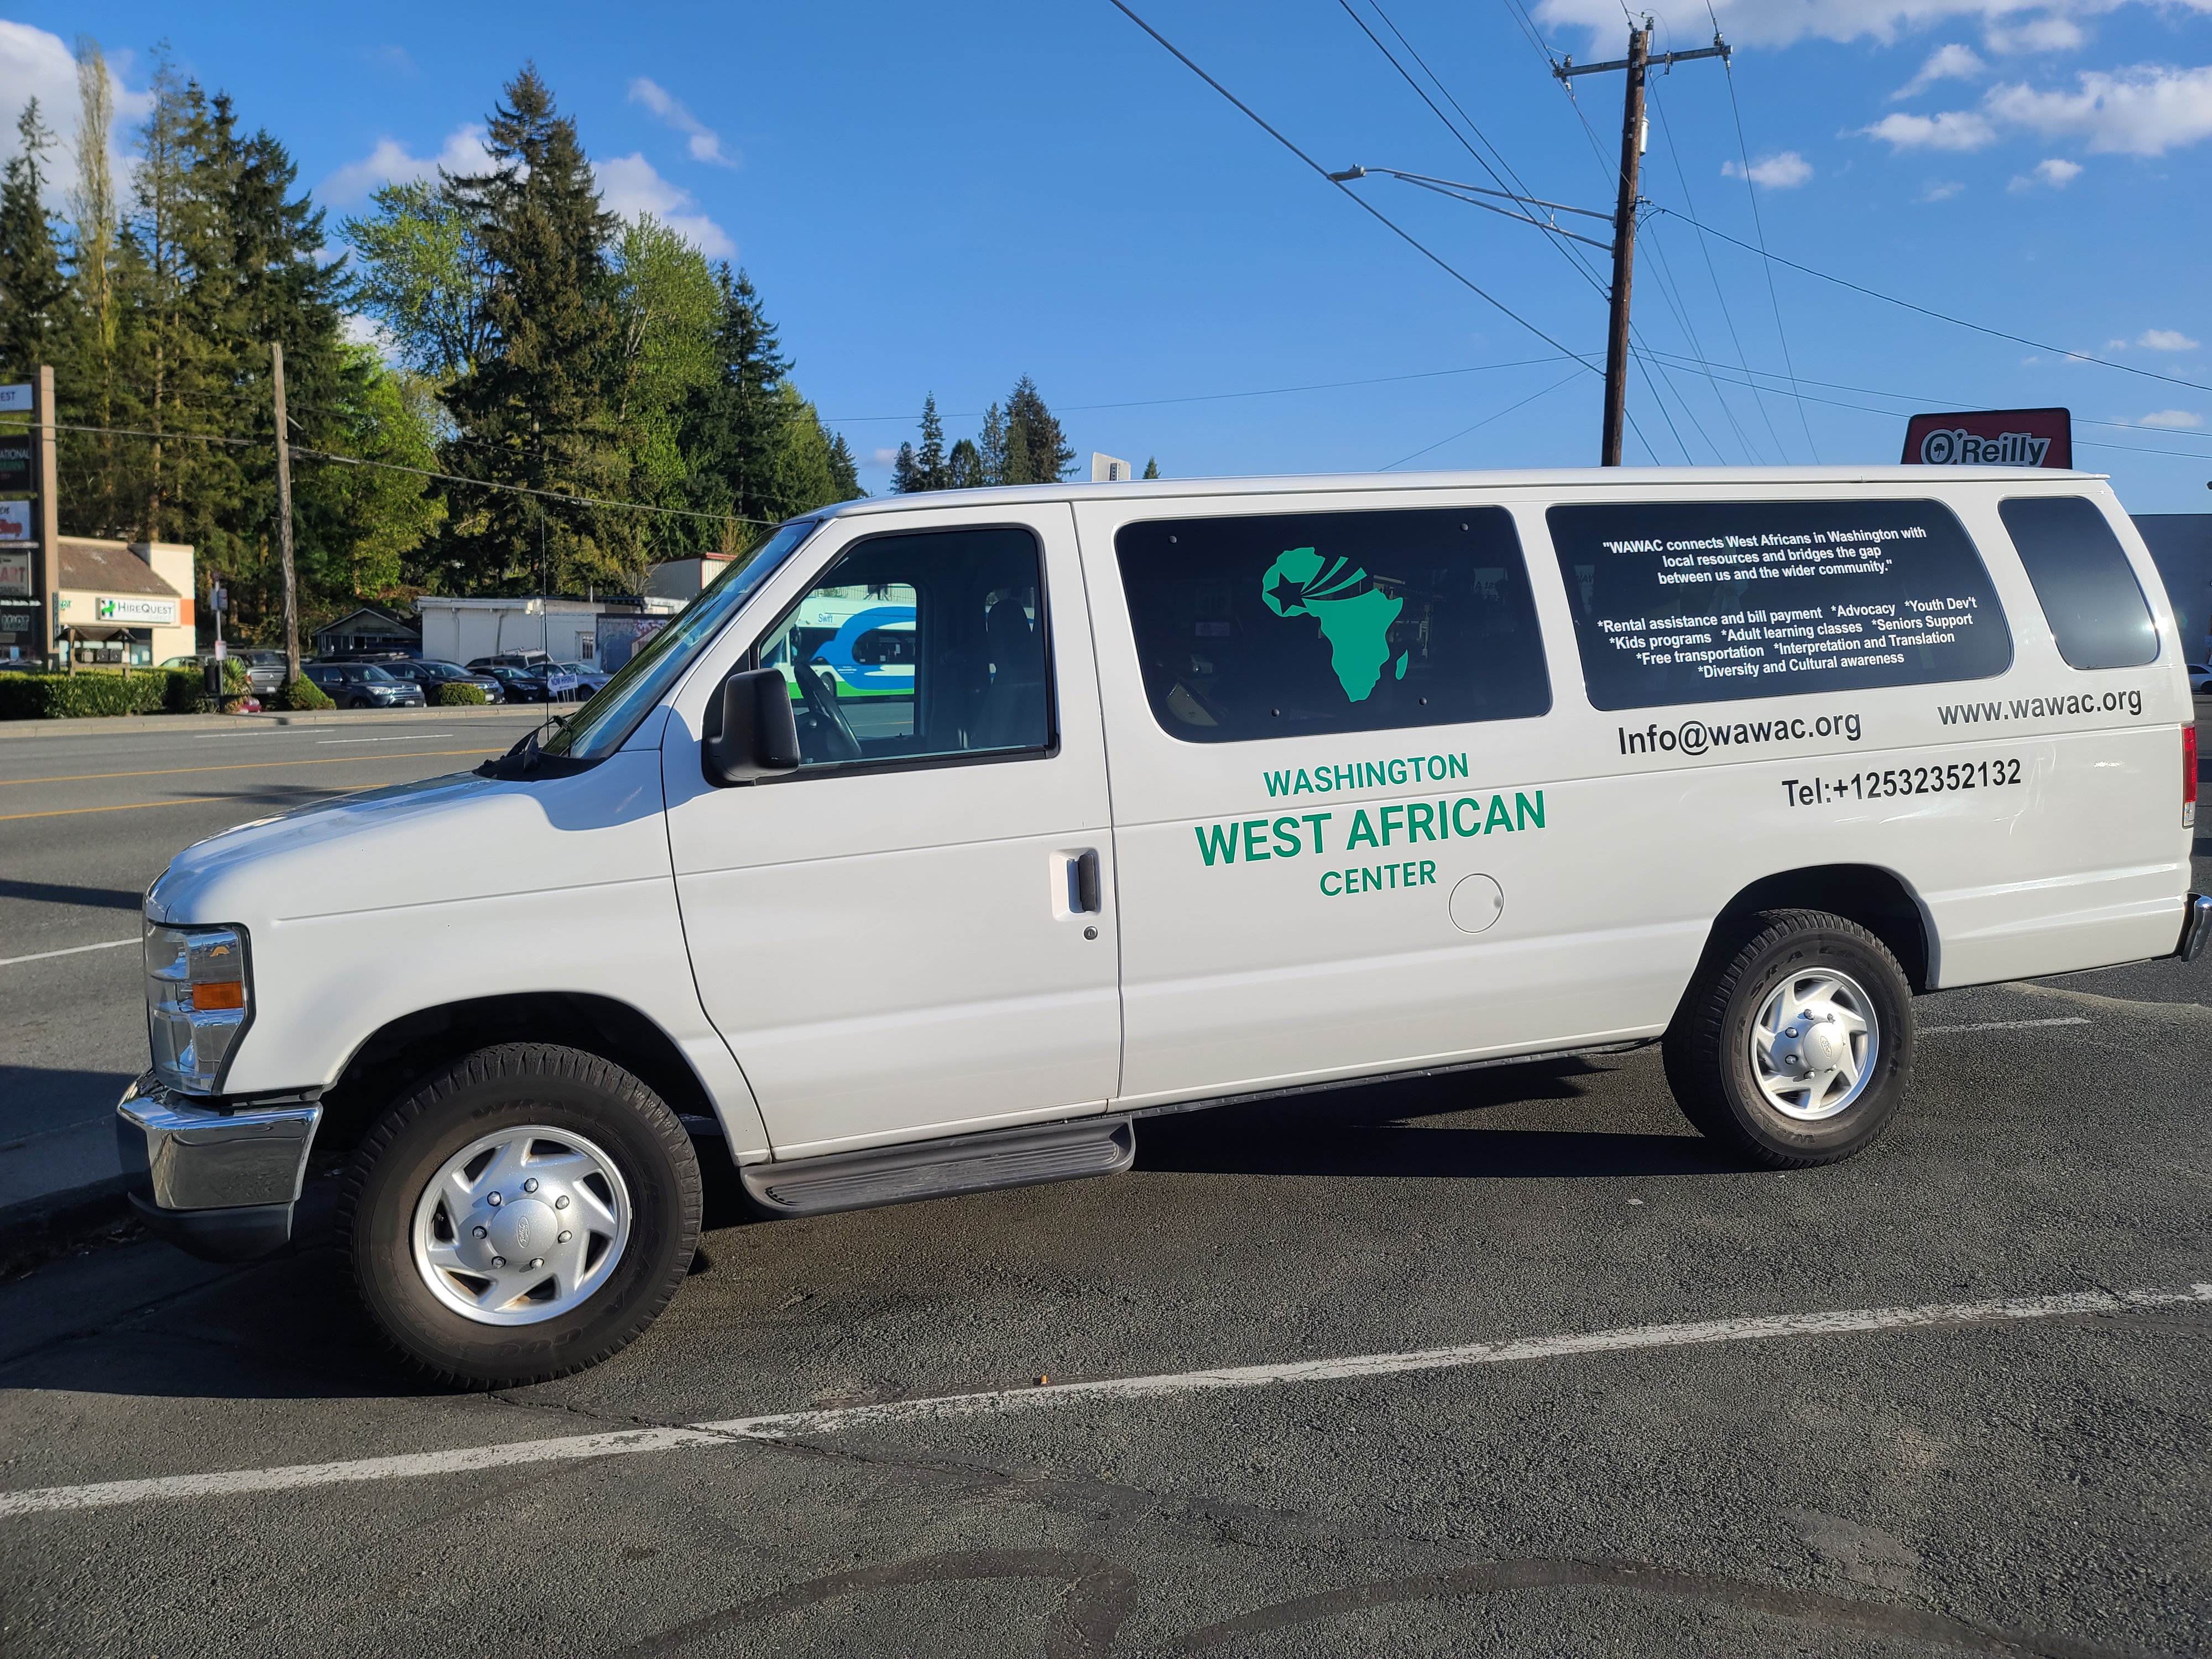 WAWAC's Van has helped the organization serve those who need their help throughout the pandemic.